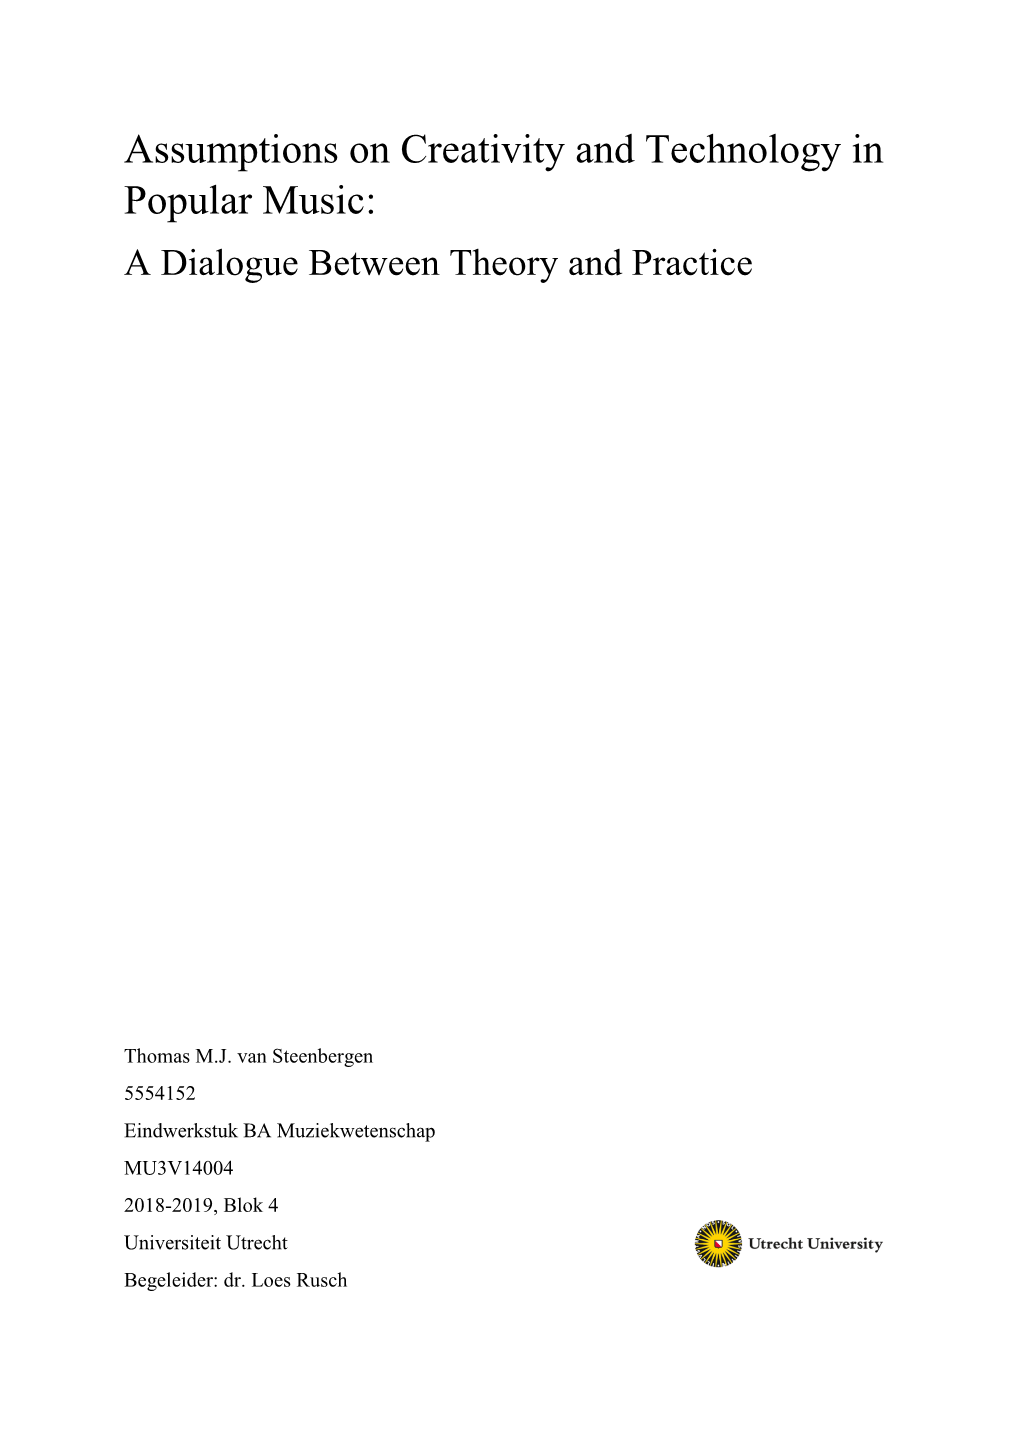 Assumptions on Creativity and Technology in Popular Music: a Dialogue Between Theory and Practice